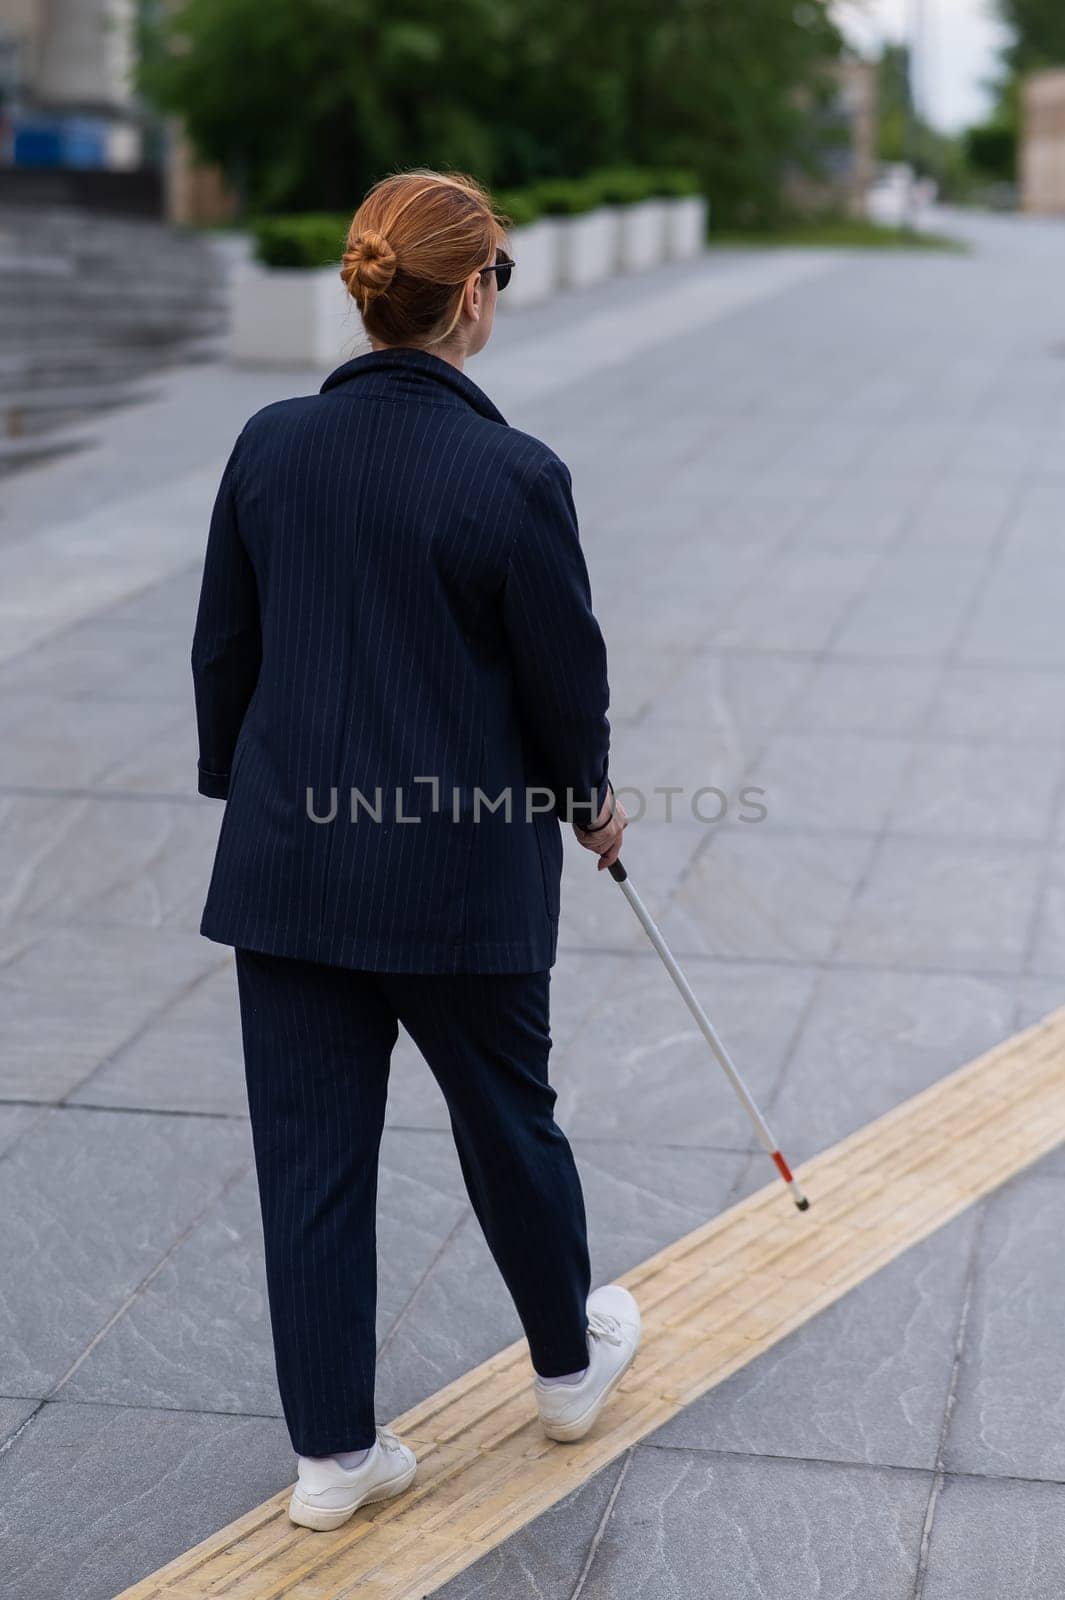 Blind businesswoman walking along tactile tiles with a cane. by mrwed54